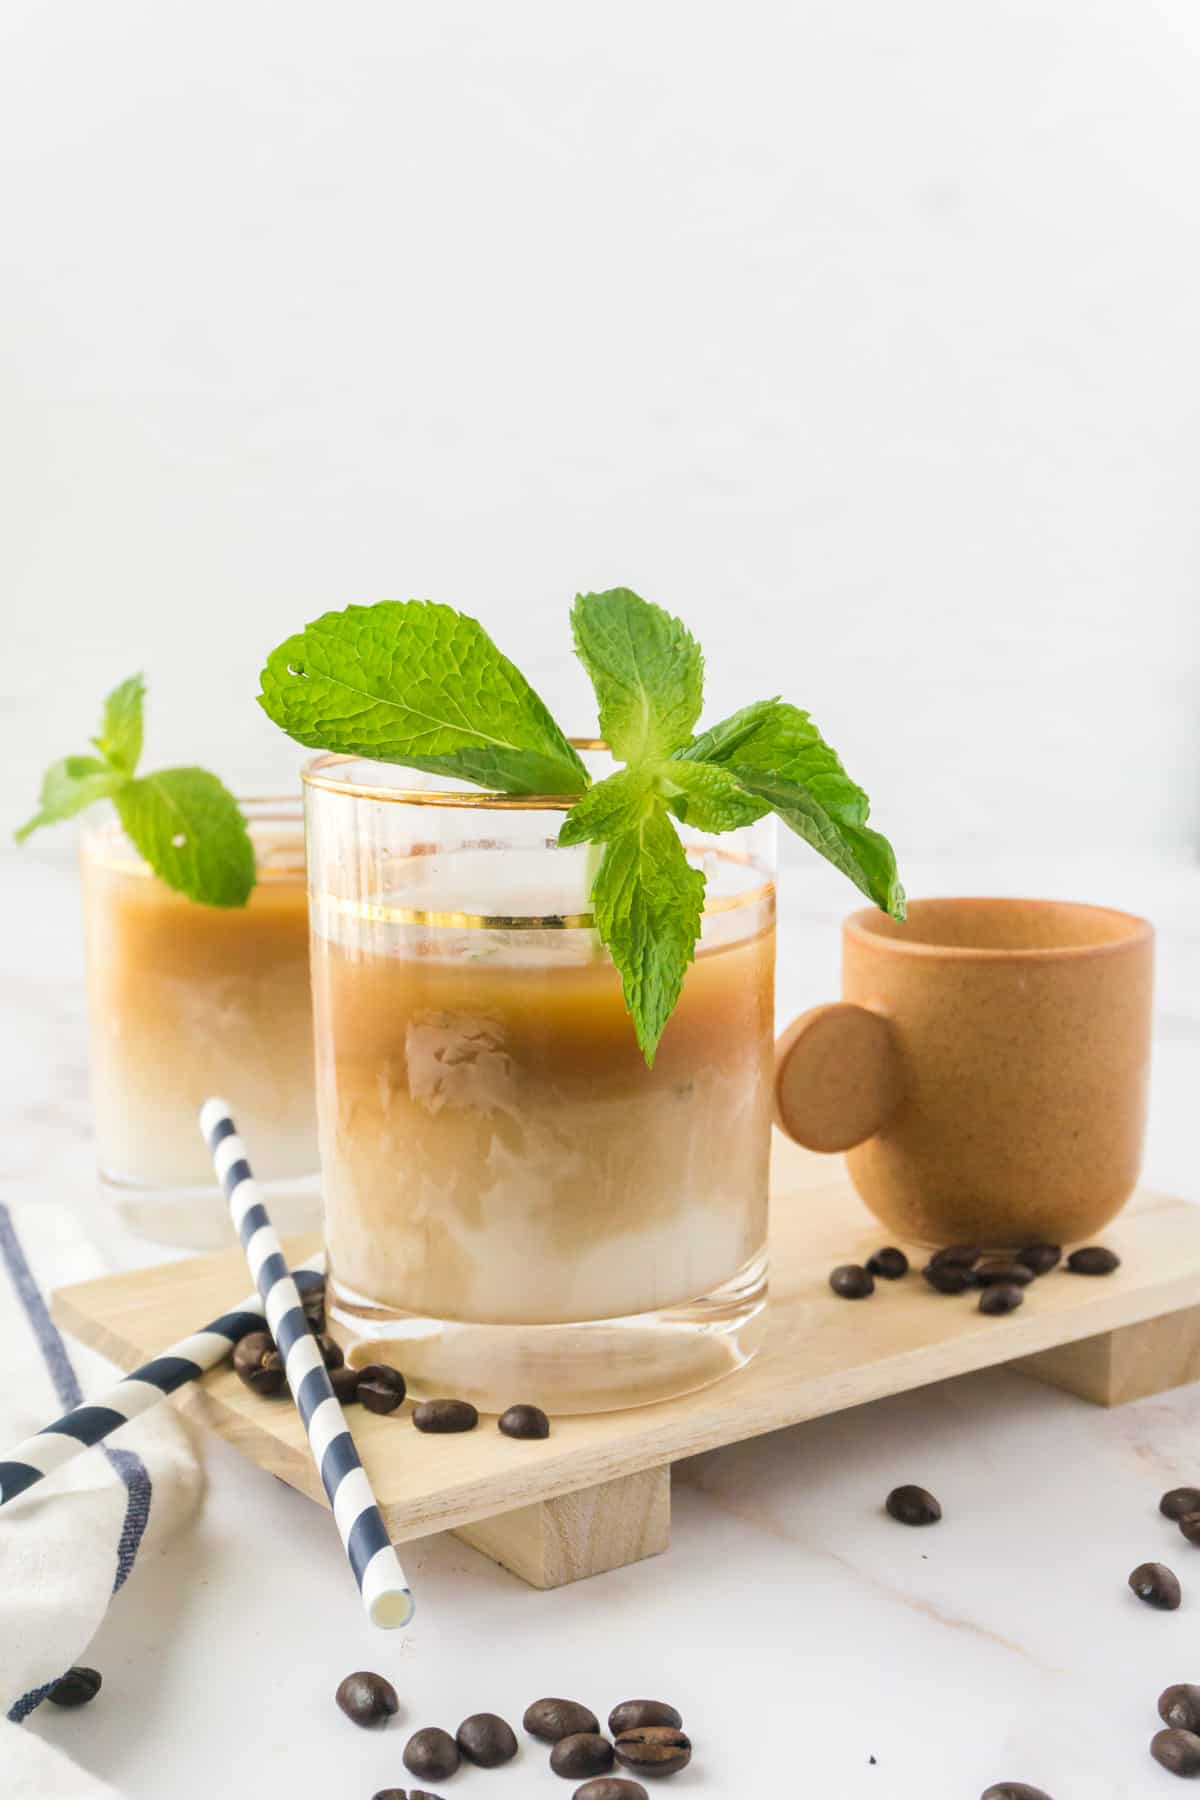 Mint mojito coffee drinks on a wooden plate.